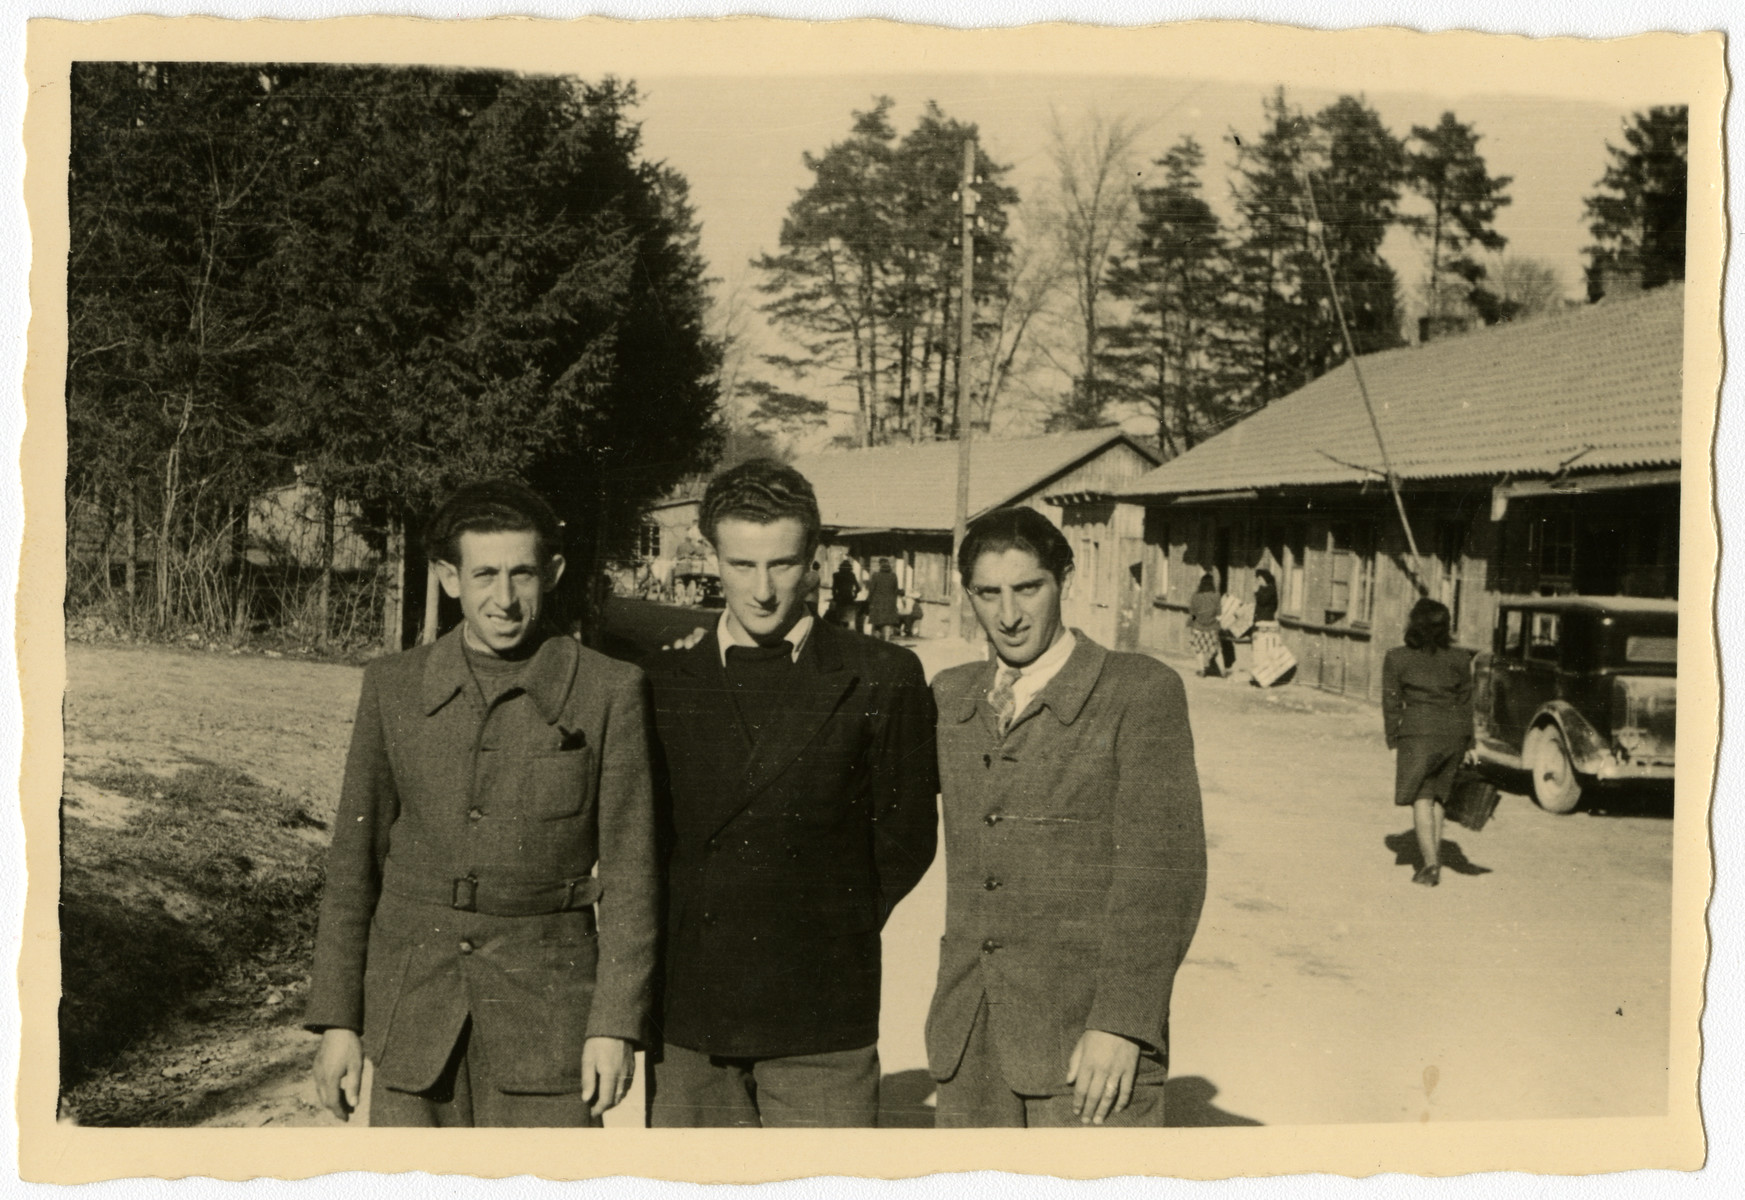 Portrait of three young men in the Feldafing displaced persons camp.

Pictured from left to right are Janek (Jack) Glucksman, Jaszke Aronowitz (Jack Arnel) and Chamek (Harry) Weinroth.